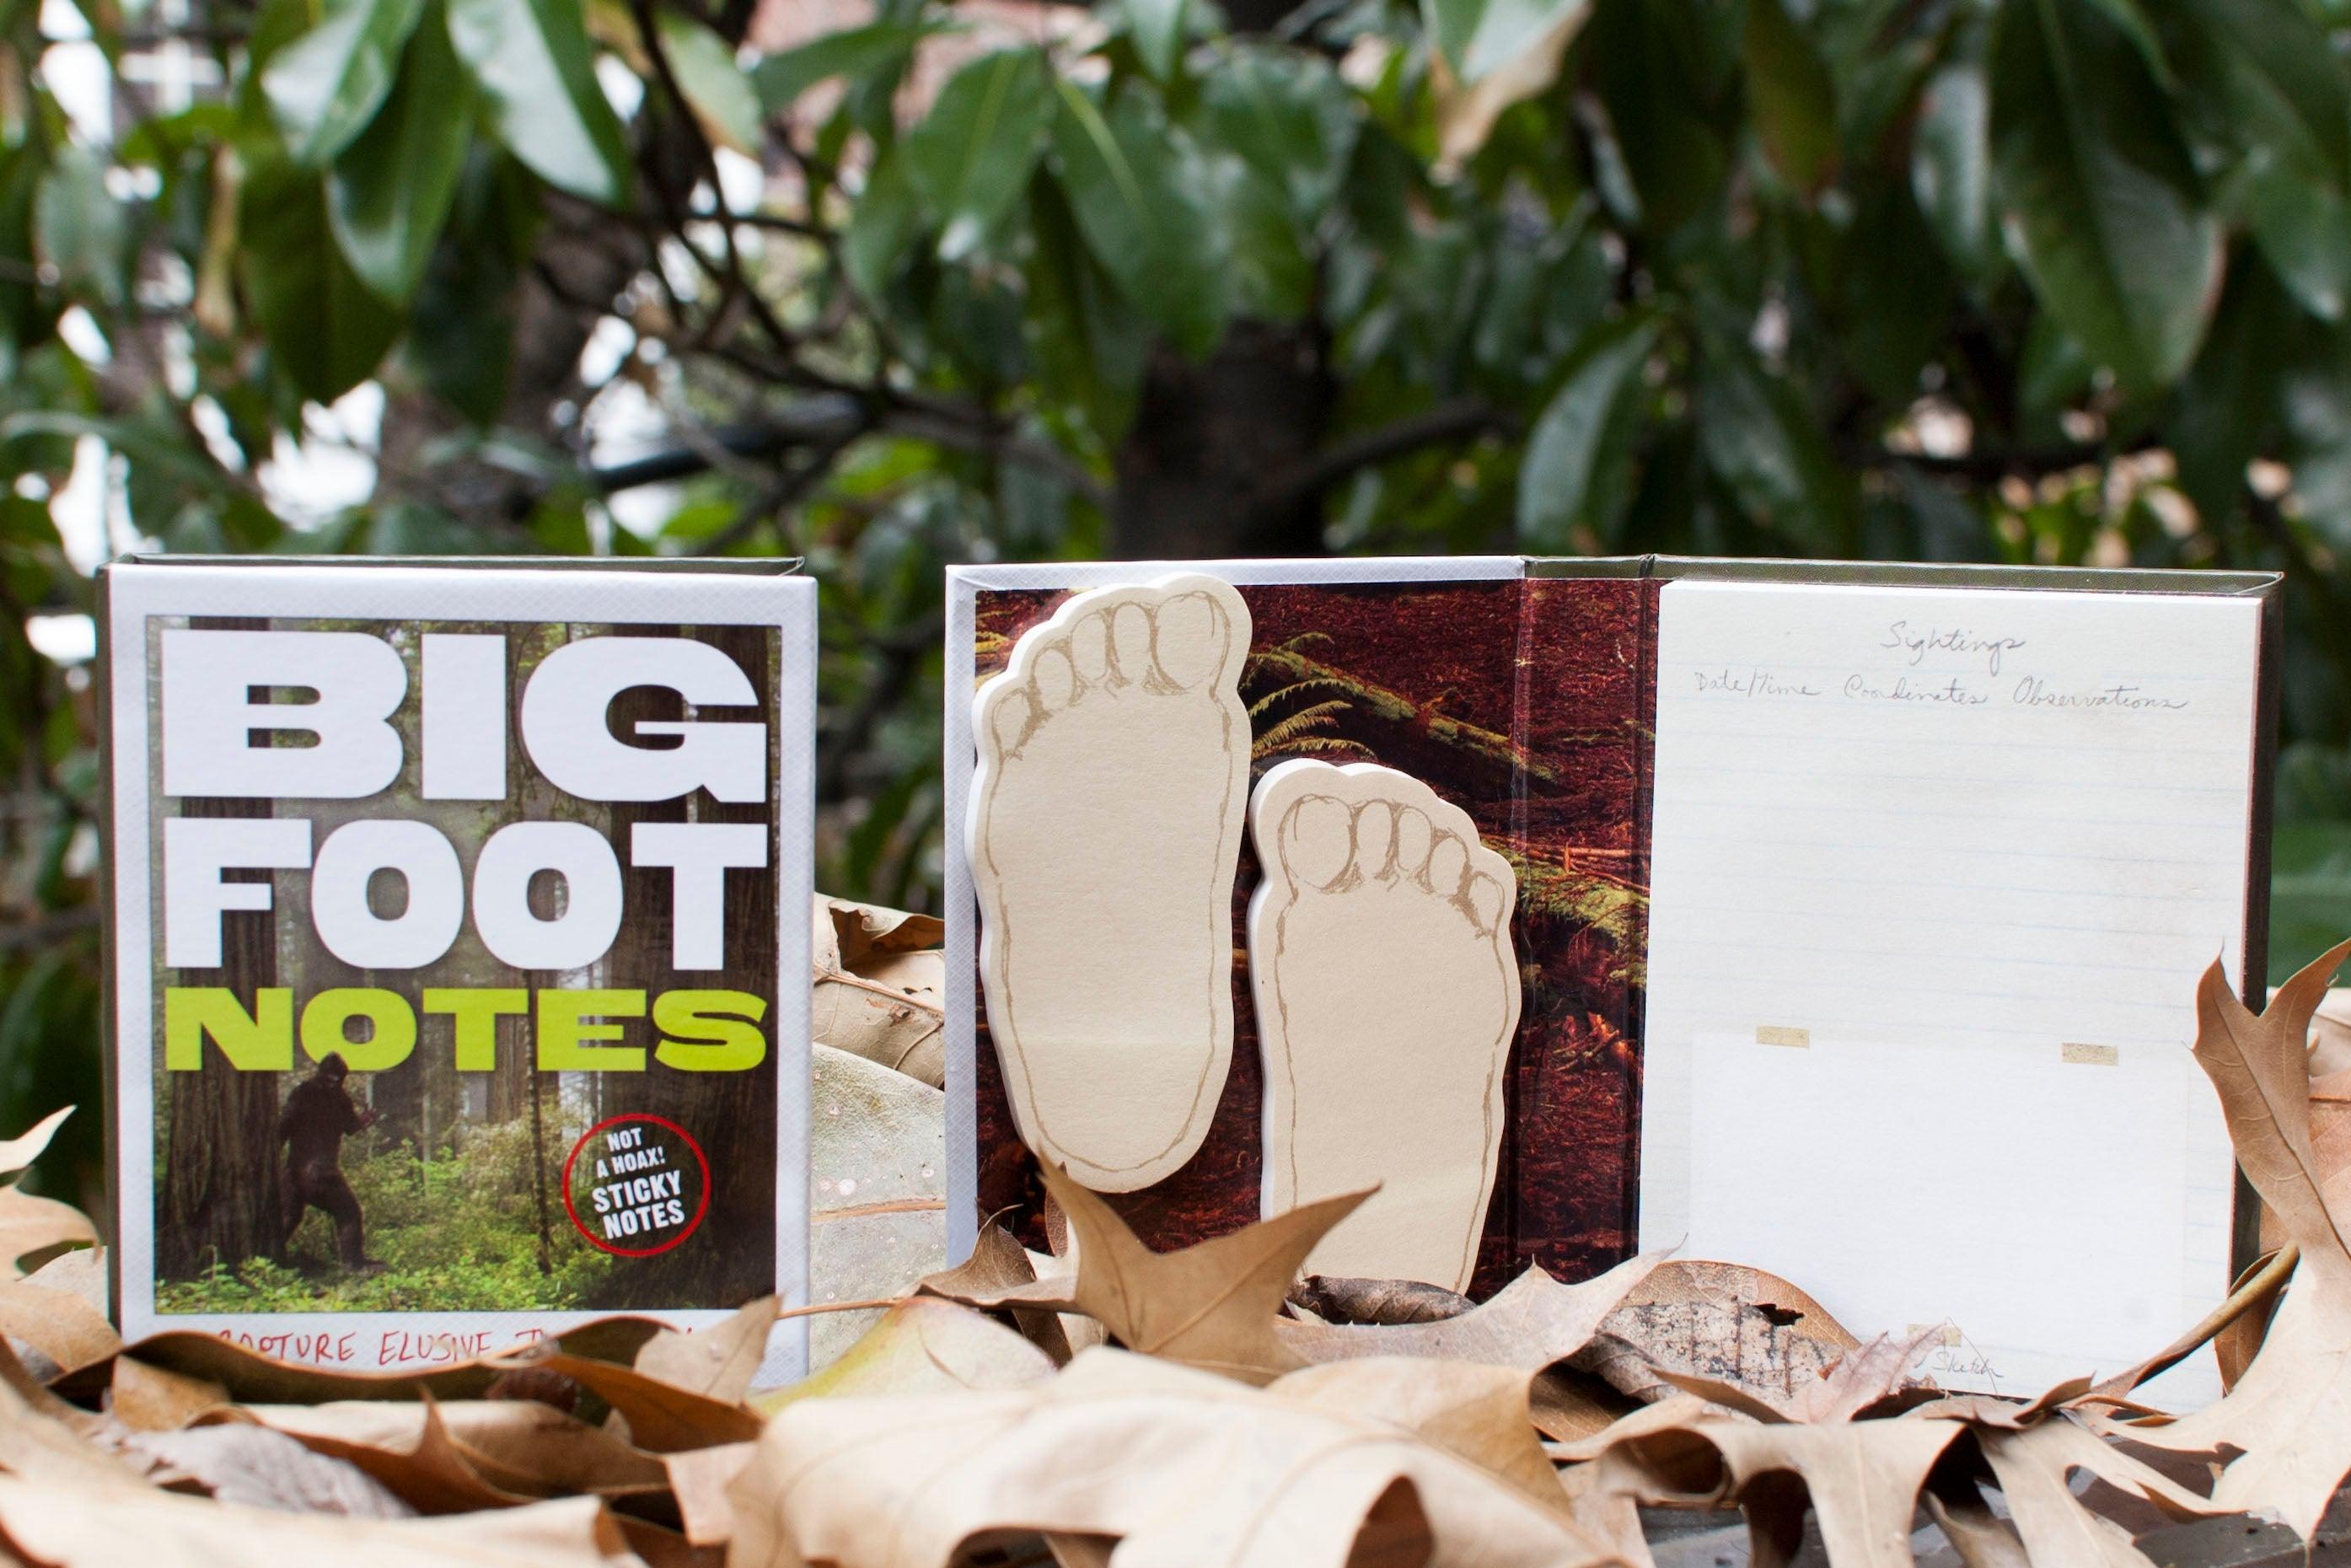 Product photo of Bigfoot Notes Sticky Notes, a novelty gift manufactured by The Unemployed Philosophers Guild.